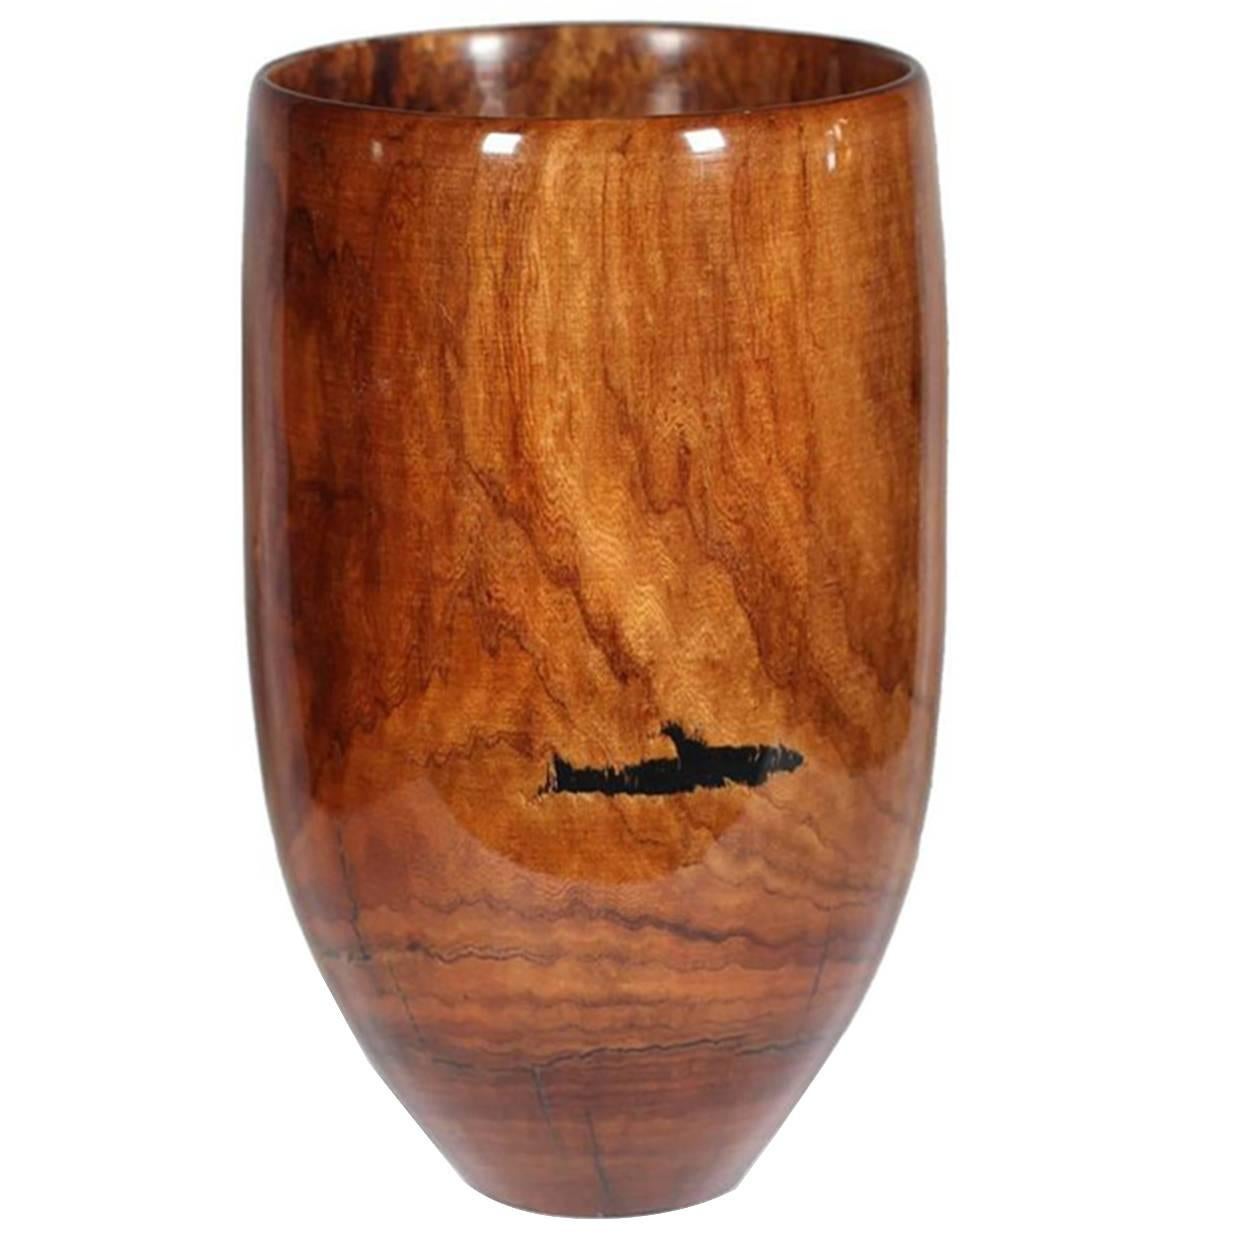 About
turned wood  Matt Moulthrop is a third generation wood turner and has spent his entire life surrounded by wood. As a young adult, he learned the artistry of woodturning comes not from the hand, but from the eye. Being able to “see” the shape